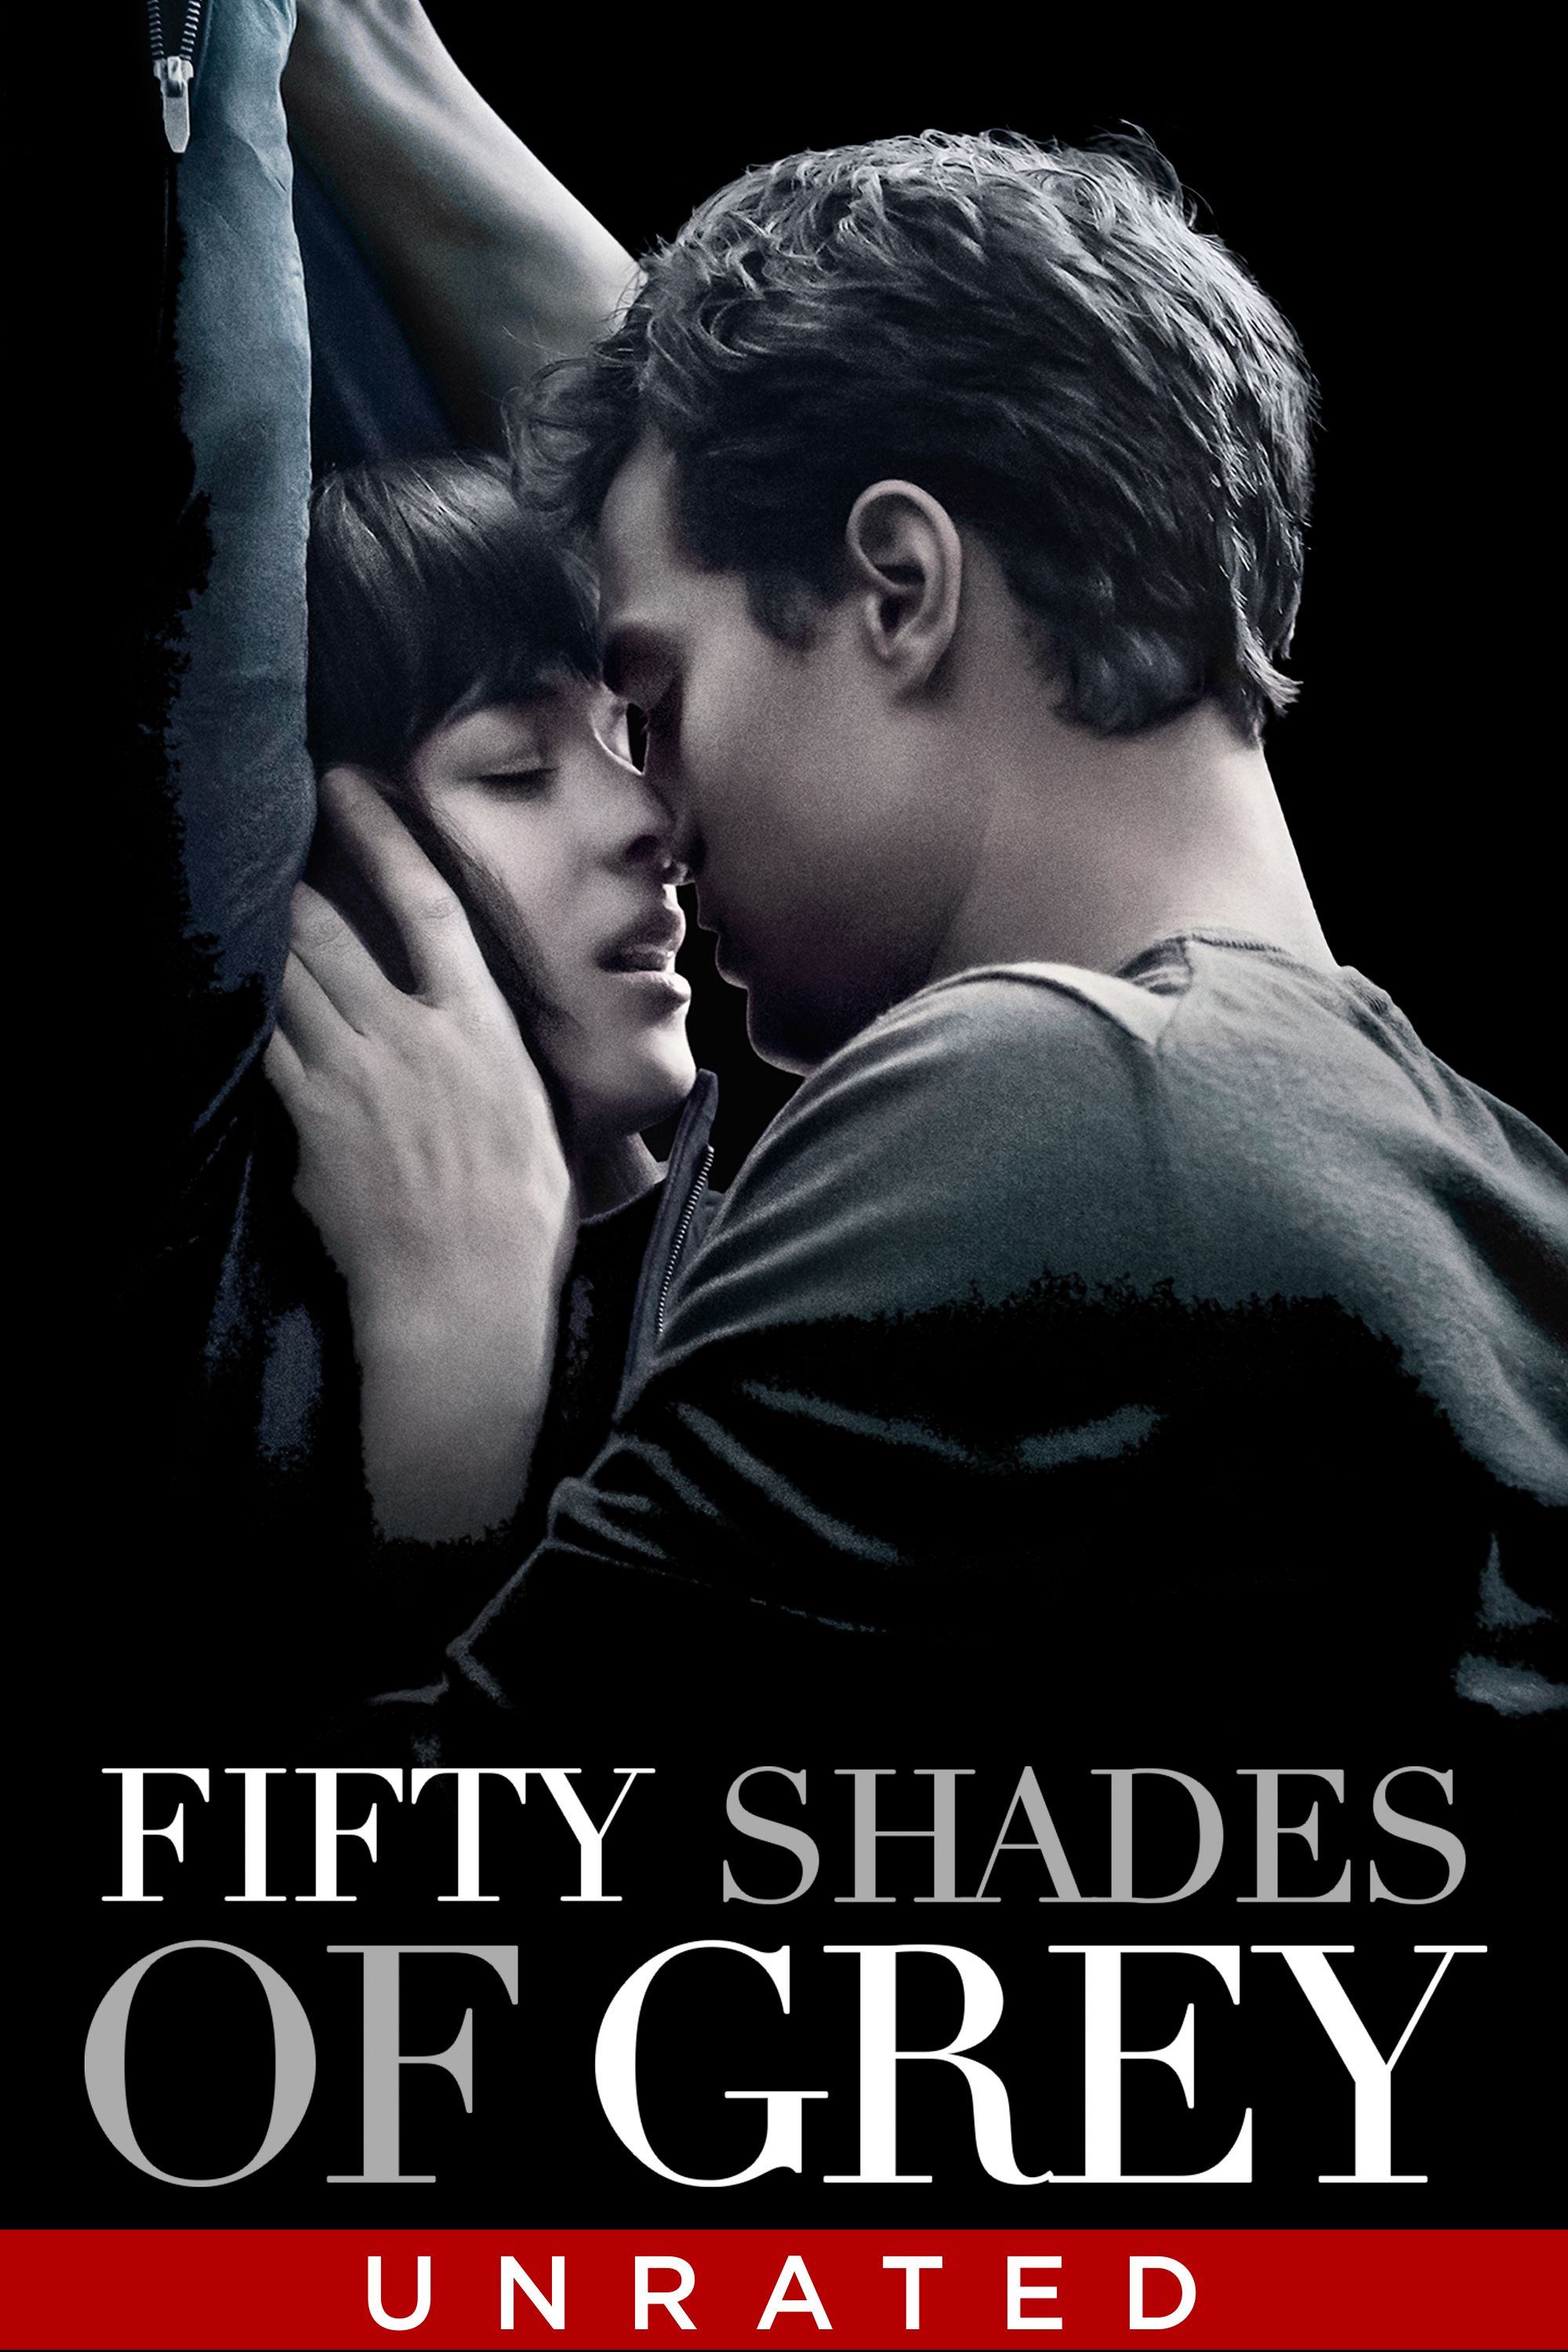 Download film shades of gray